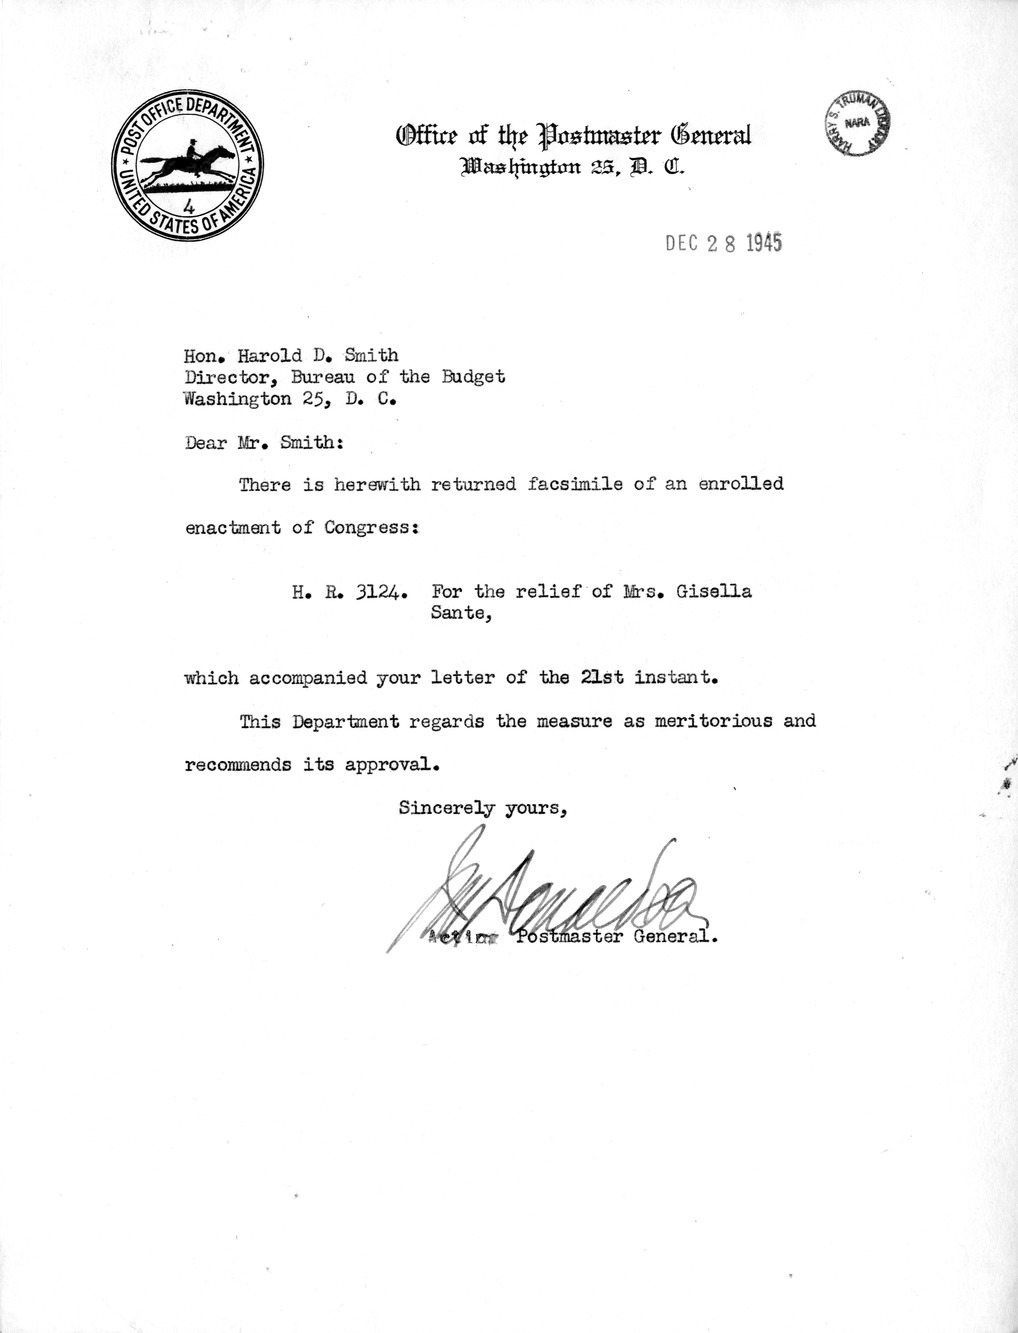 Memorandum from Frederick J. Bailey to M. C. Latta, H.R. 3124, For the Relief of Mrs. Gisella Sante, with Attachments